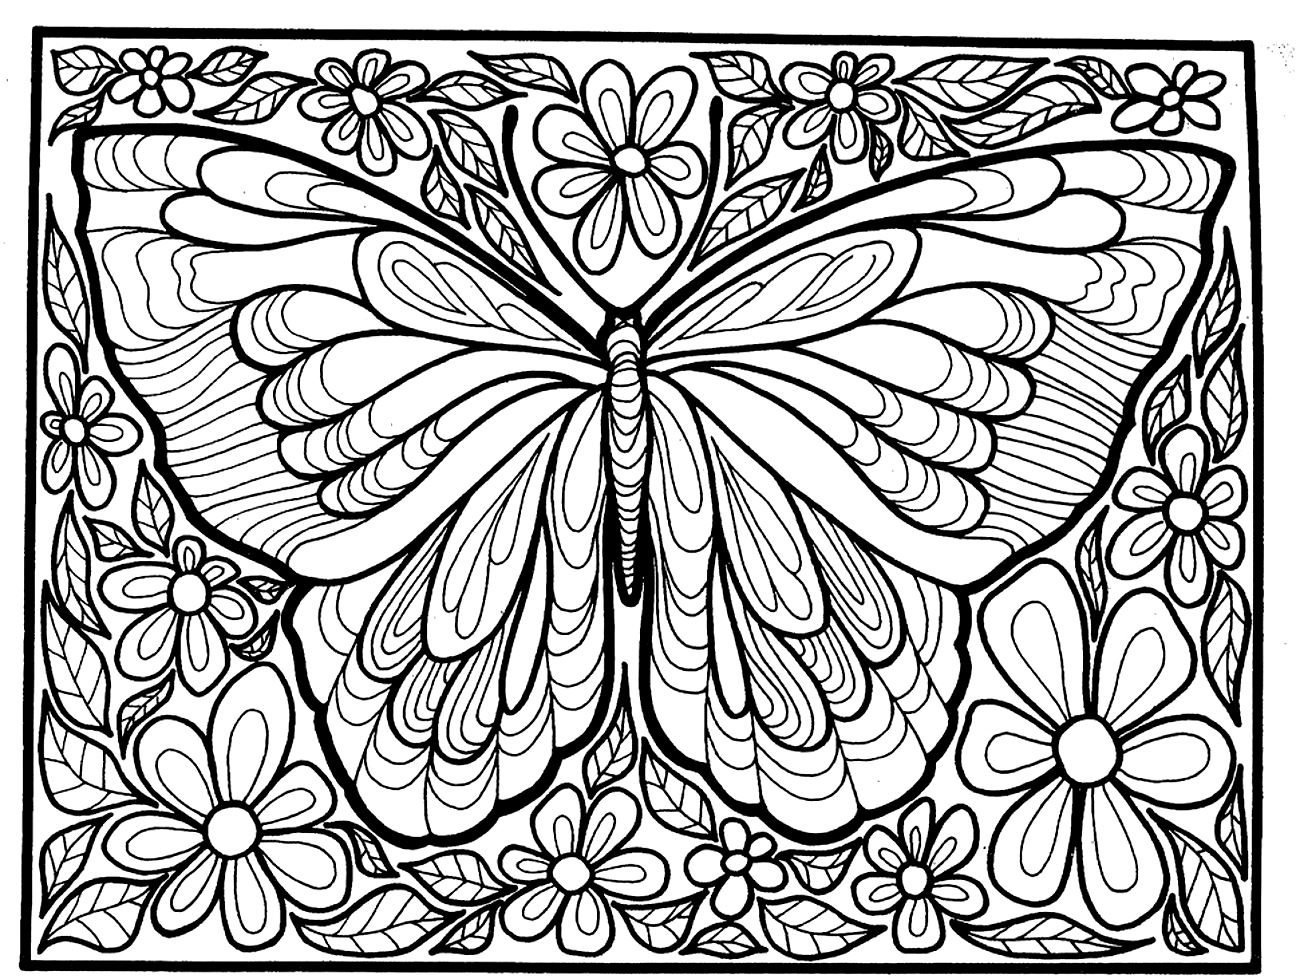 Complex adult coloring page of a butterfly with many details